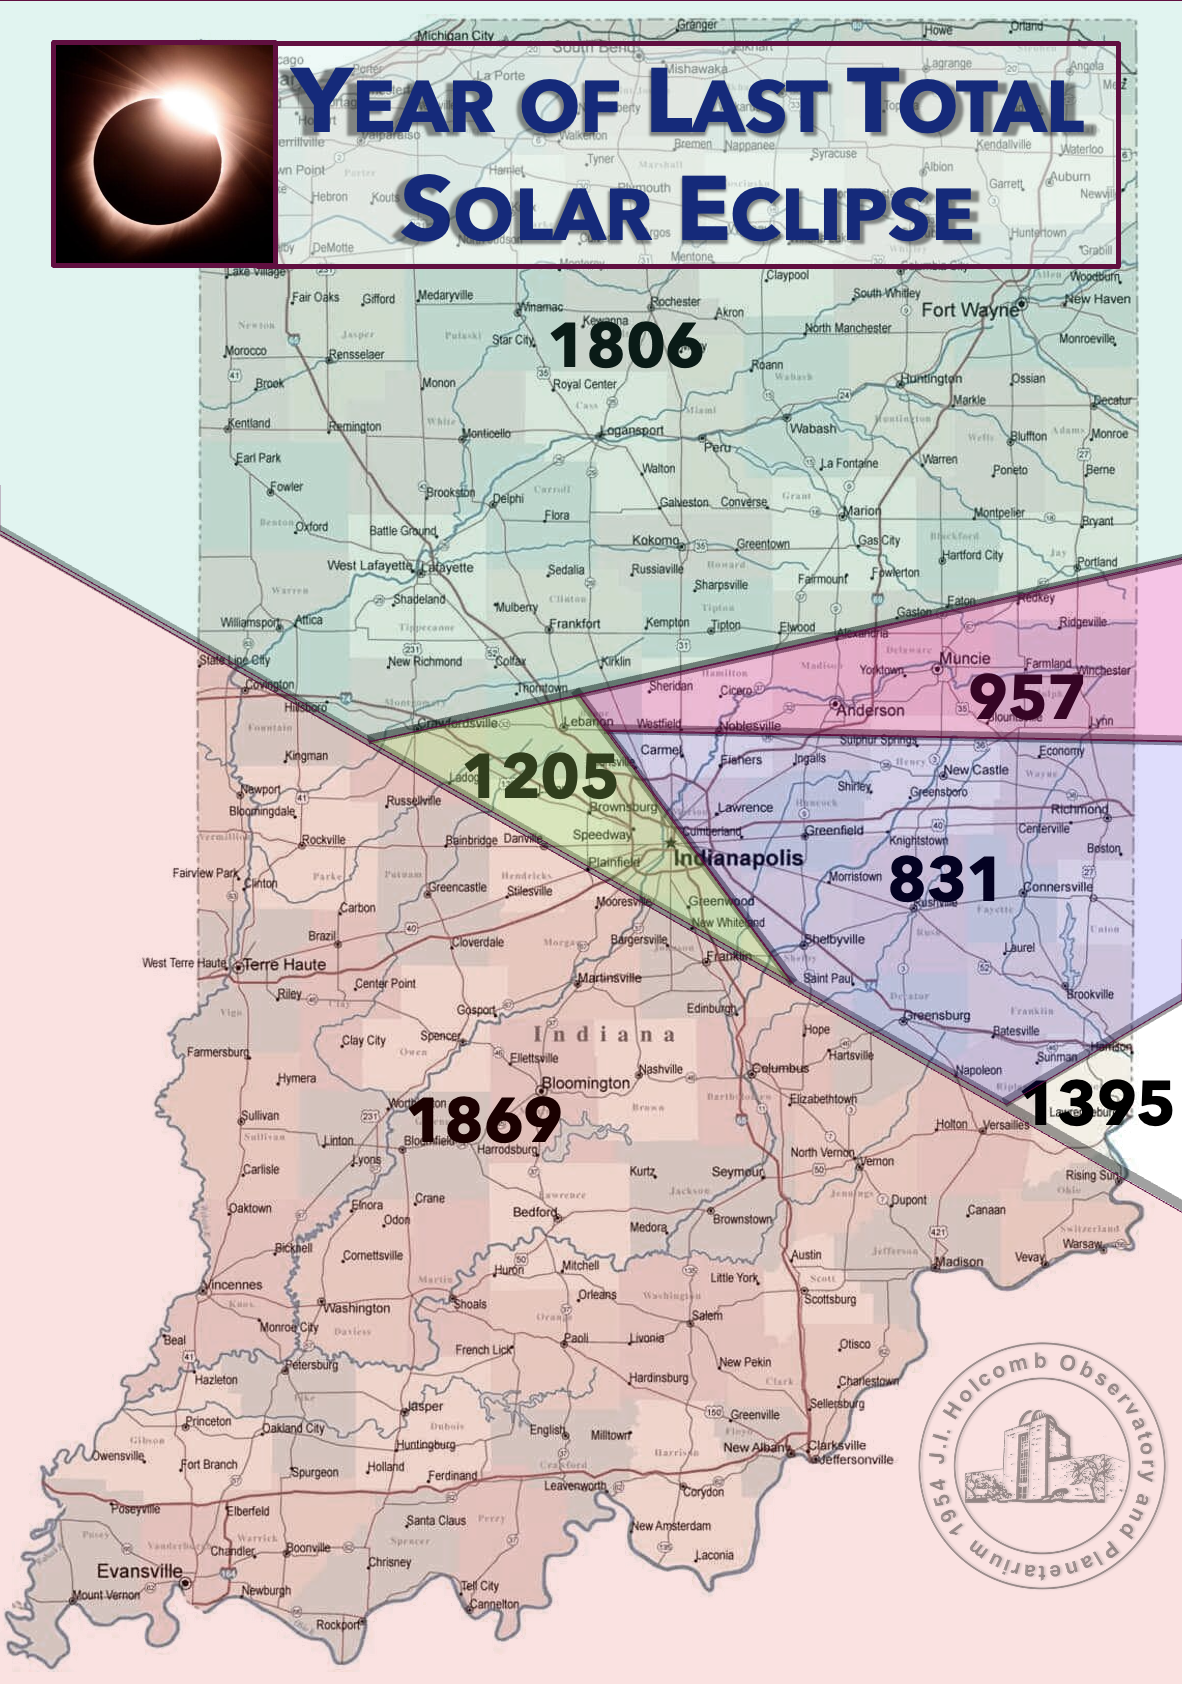 An image showing the date of the last total solar eclipse in Indiana by locale.